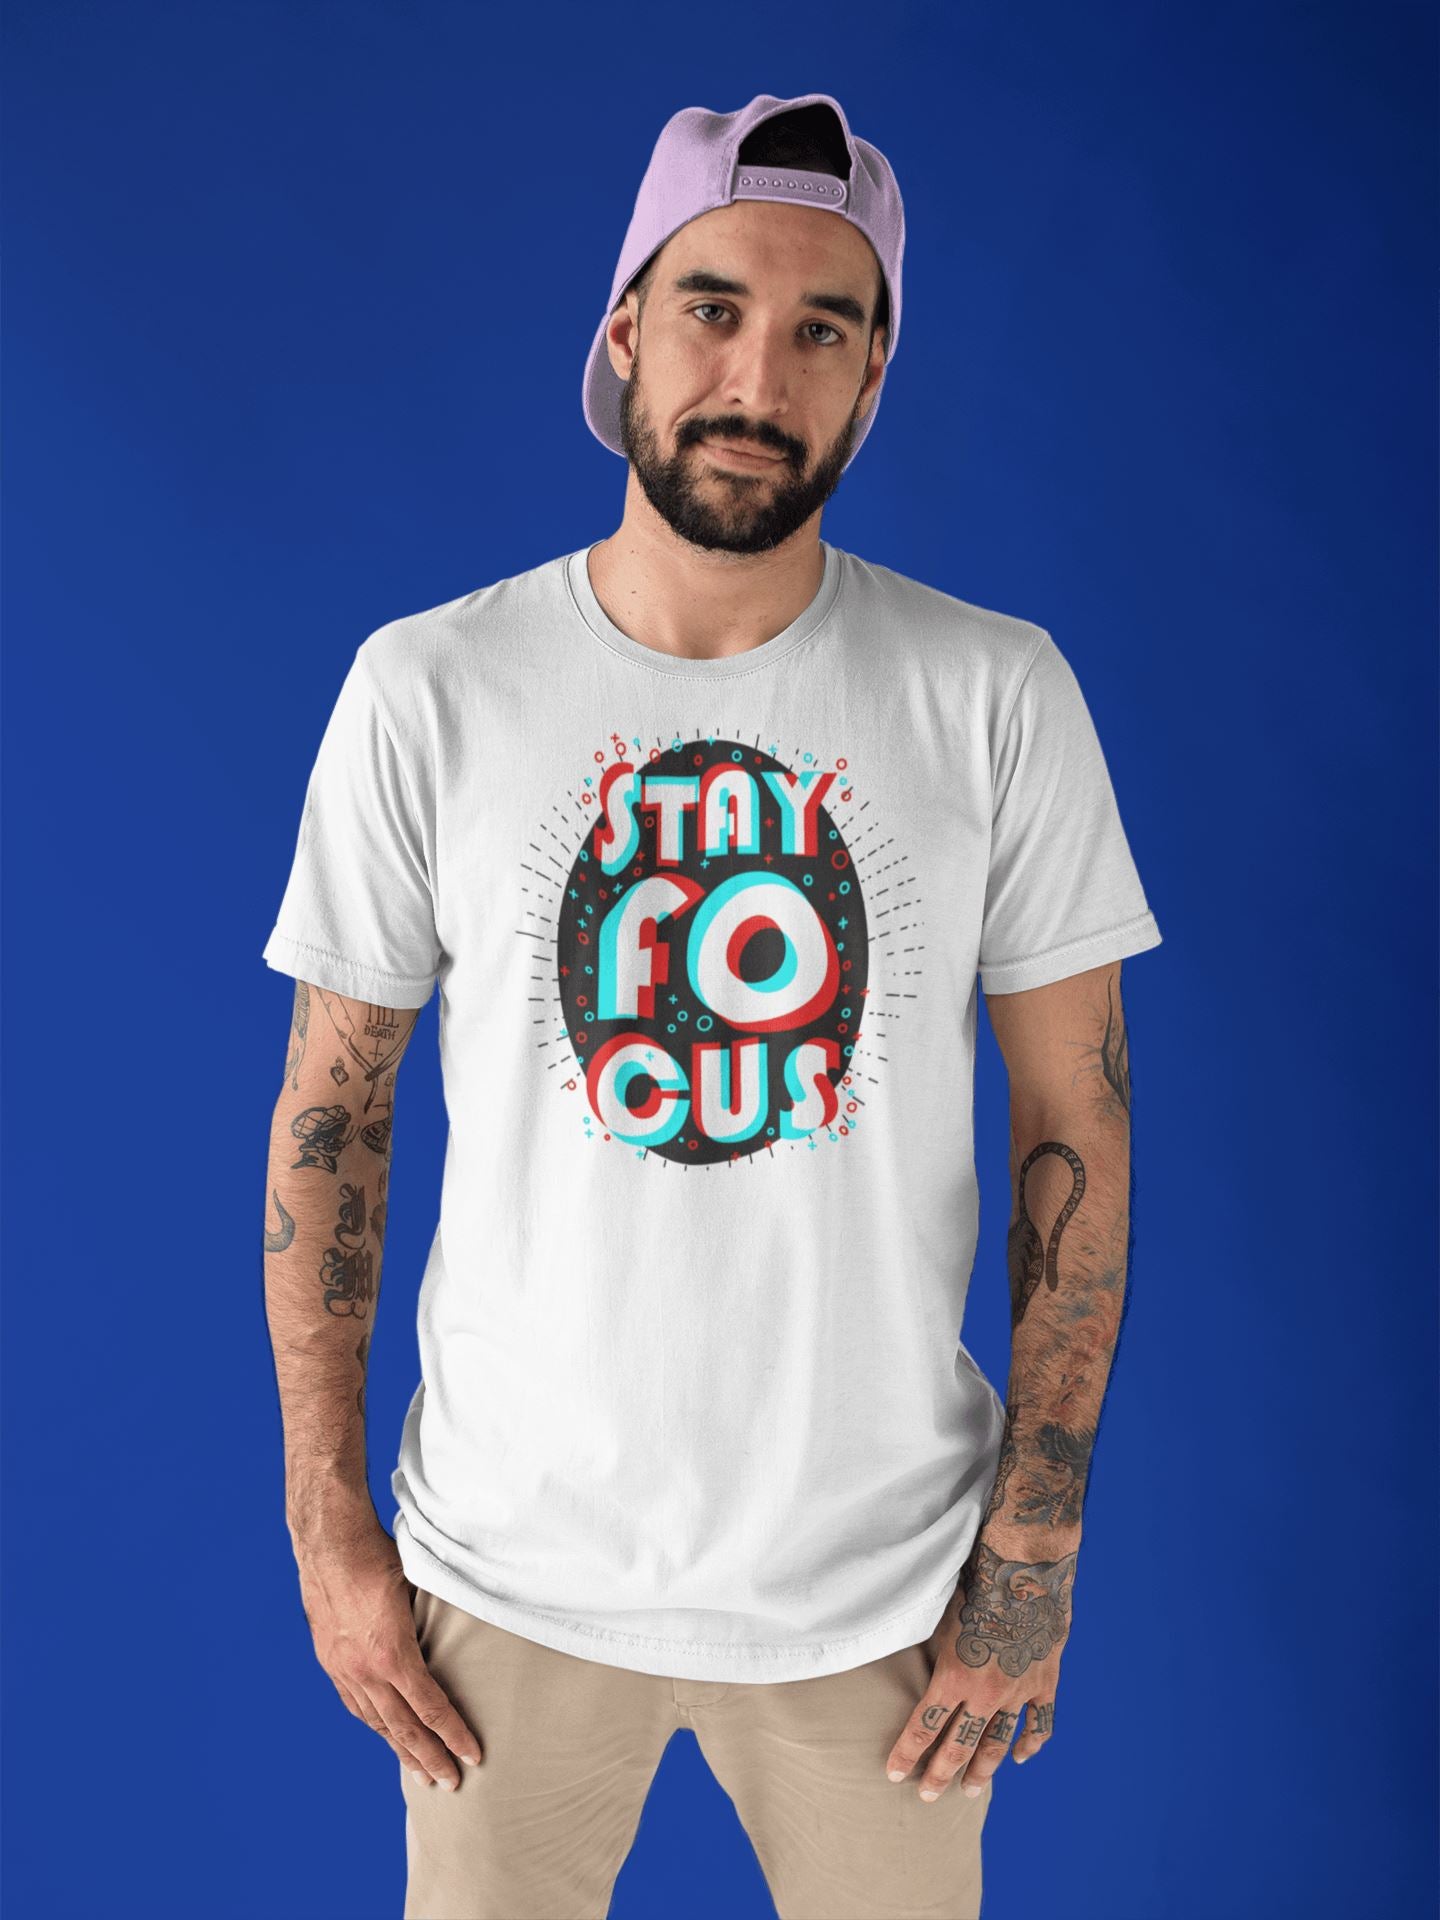 Stay Focus Supreme T Shirt for Men and Women freeshipping - Catch